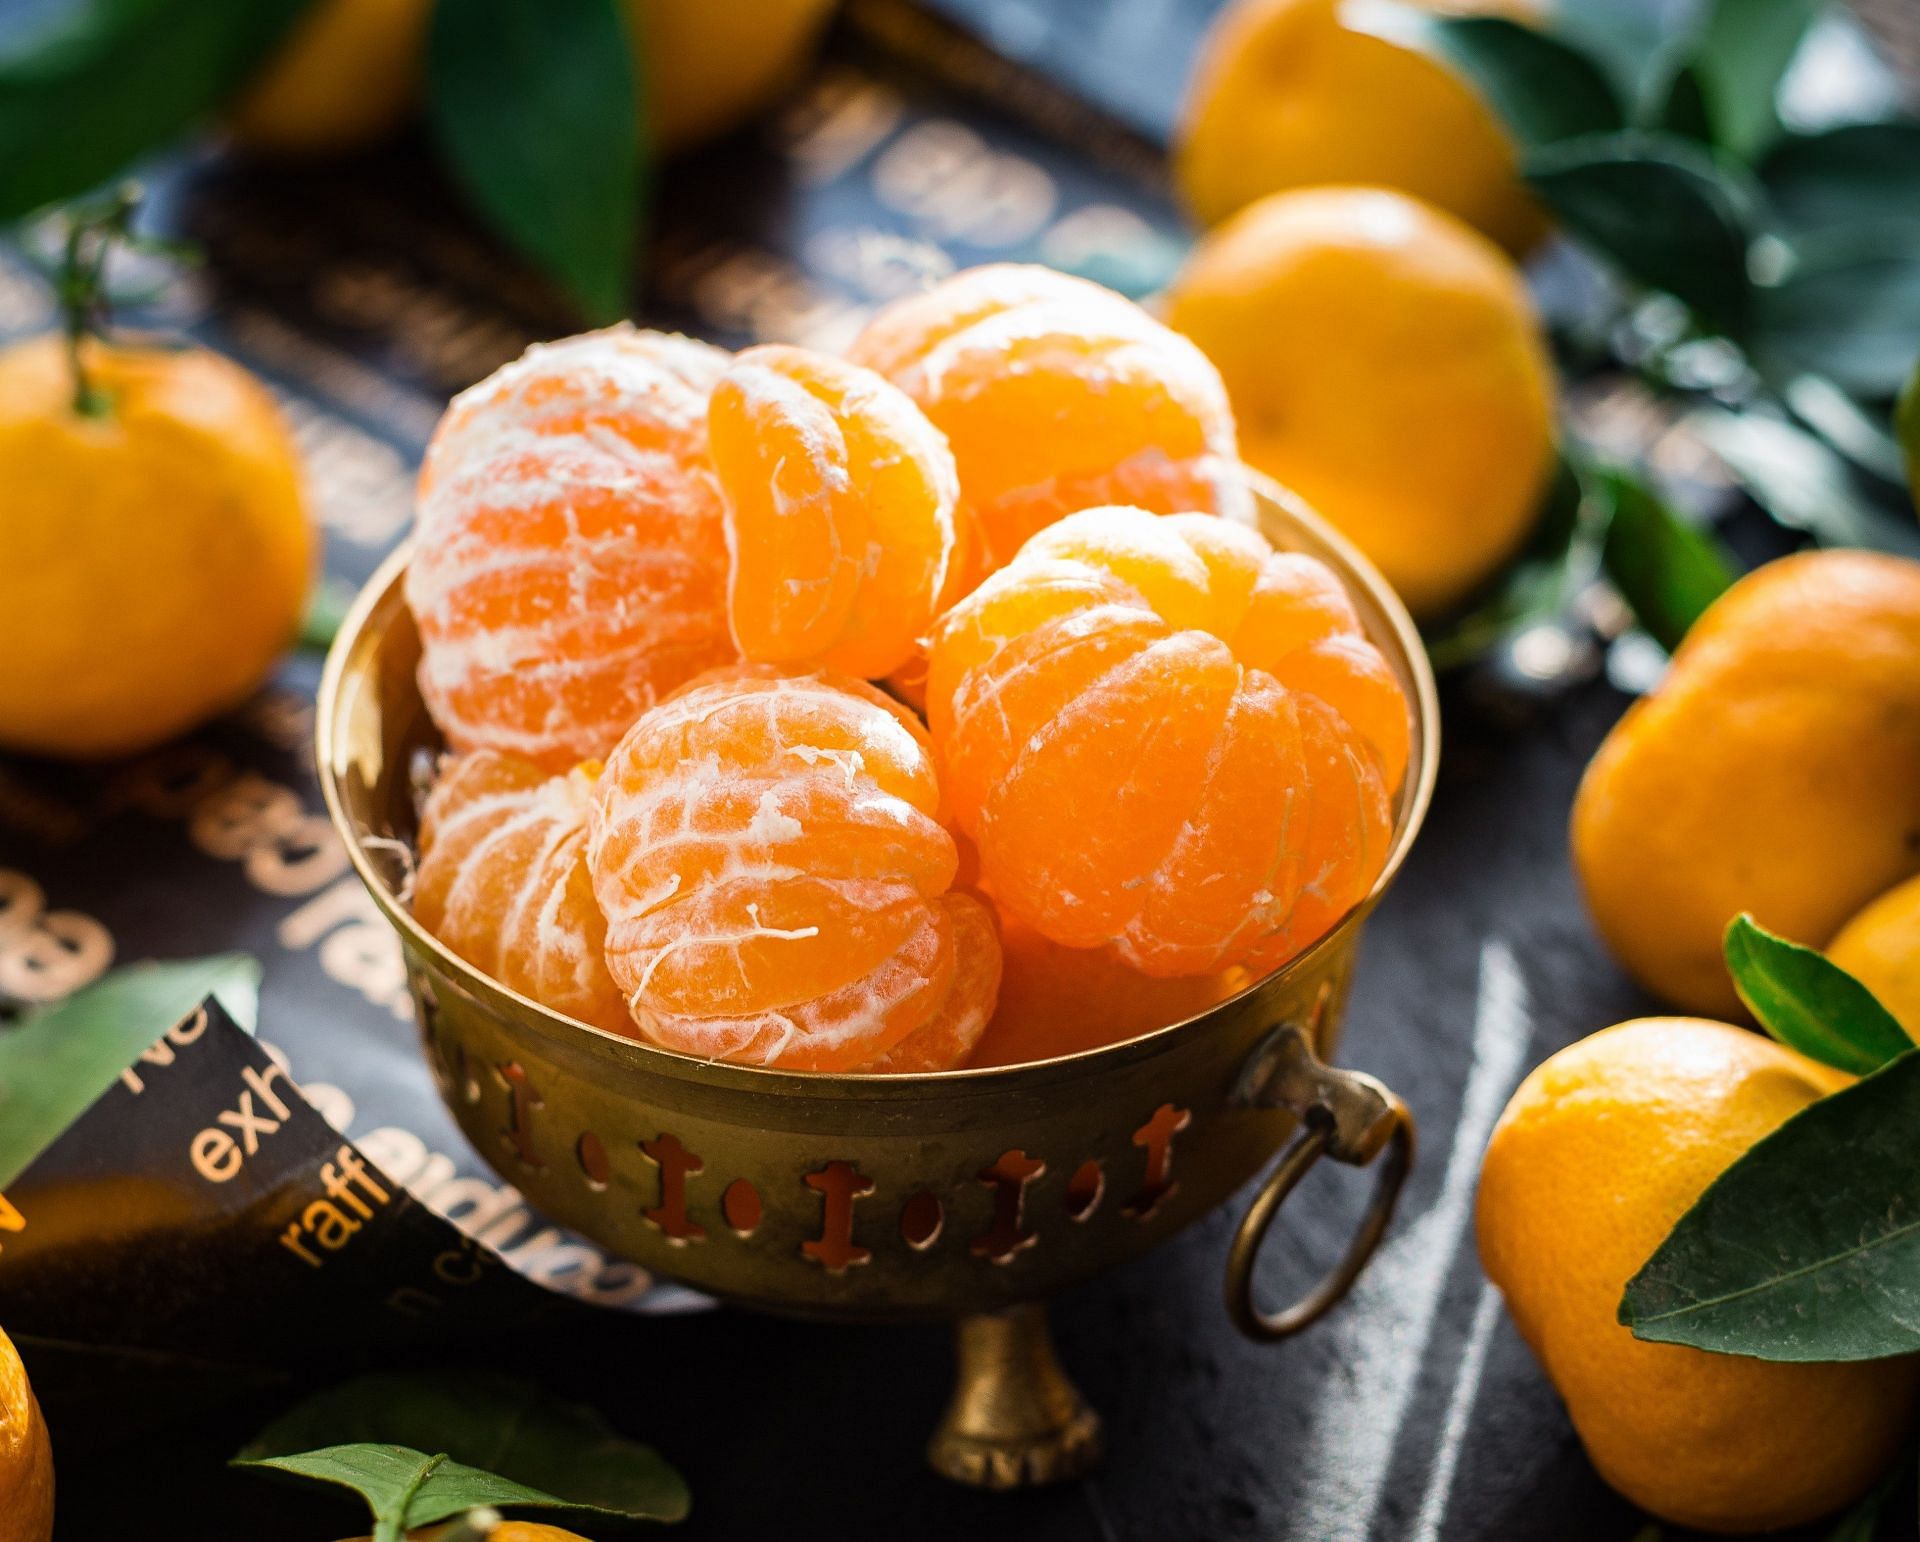 All citrus fruits are healthy sources of many vitamins and minerals, especially vitamin C (Image via Pexels @Pixabay)